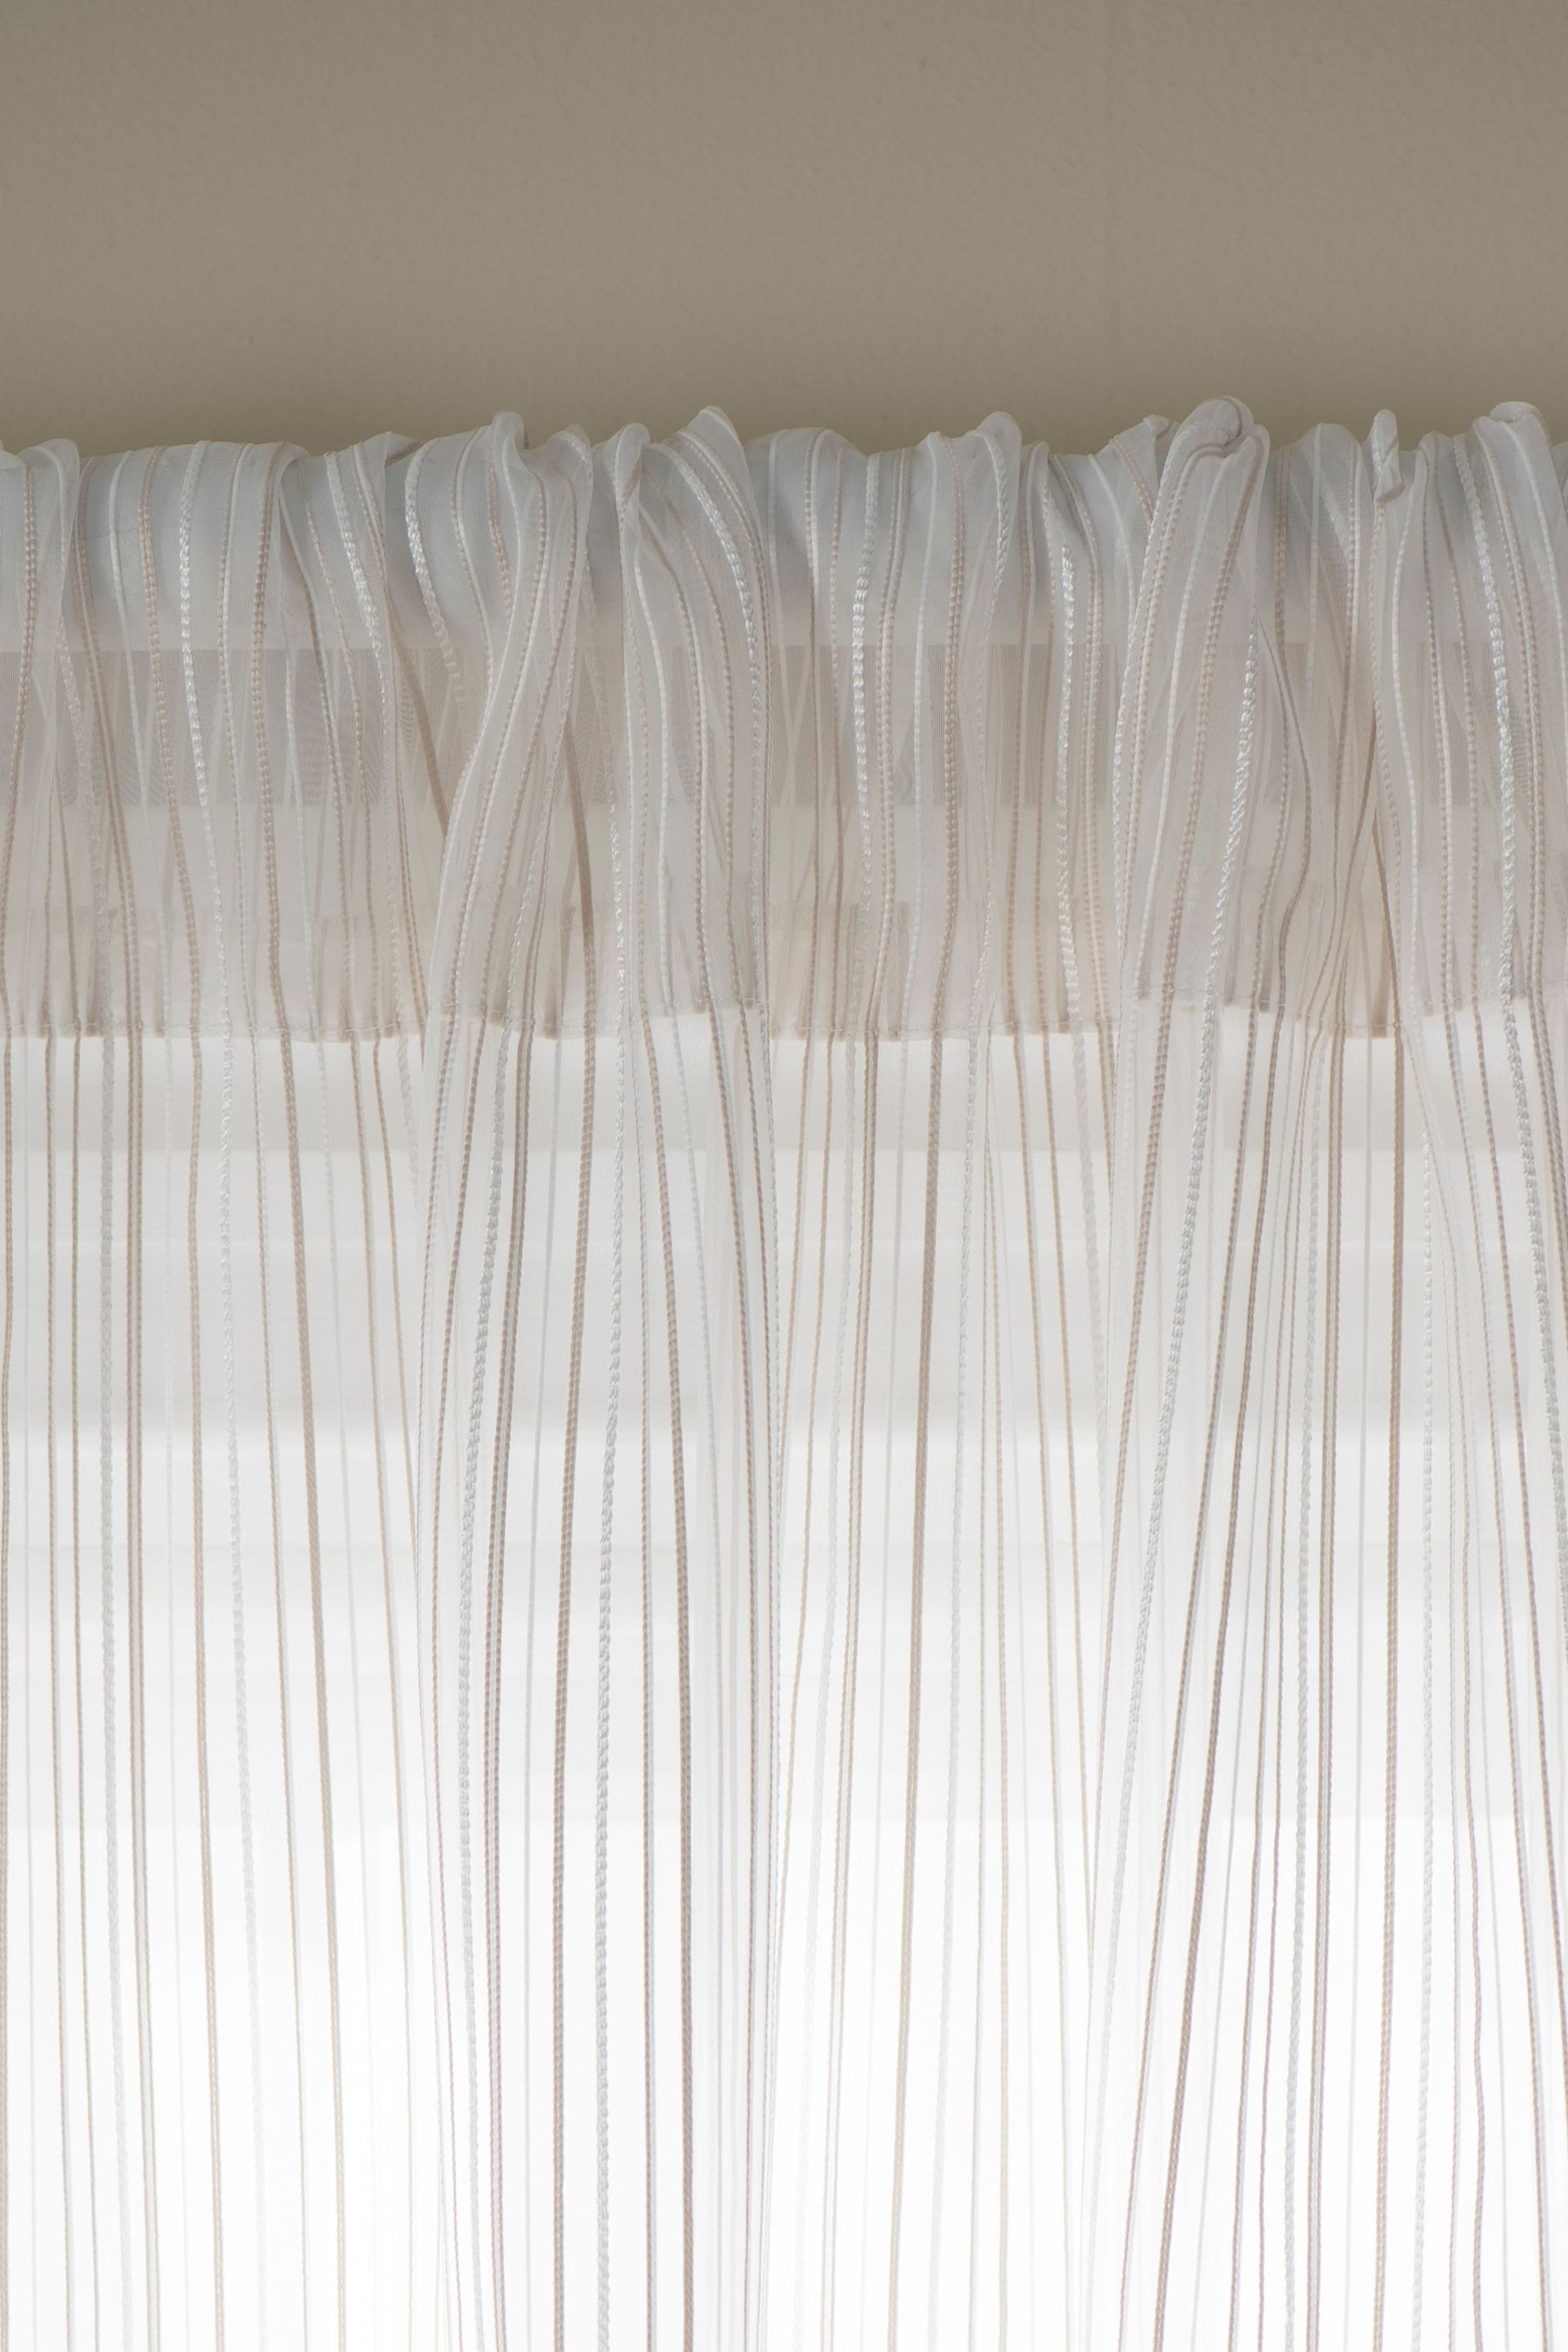 Natural Stripe Voile Slot Top Unlined Sheer Panel Curtain - Image 6 of 7